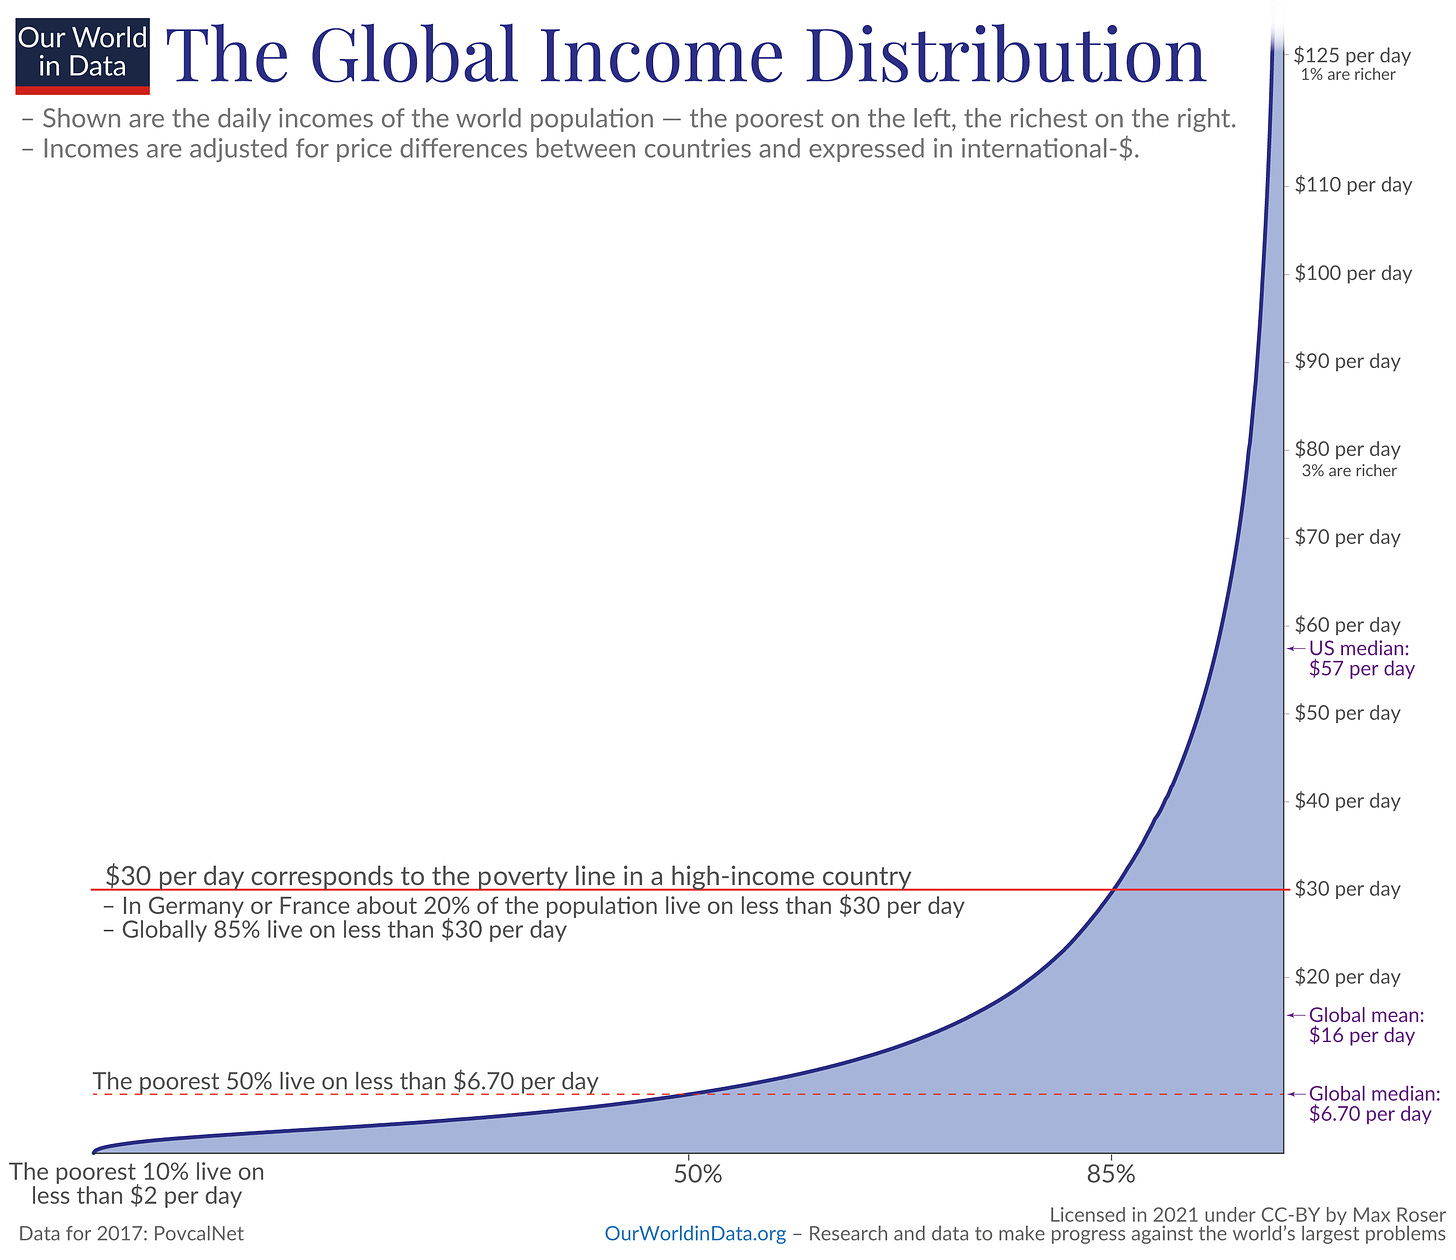 A chart demonstrating that 85% of the world lives on less than $30 a day